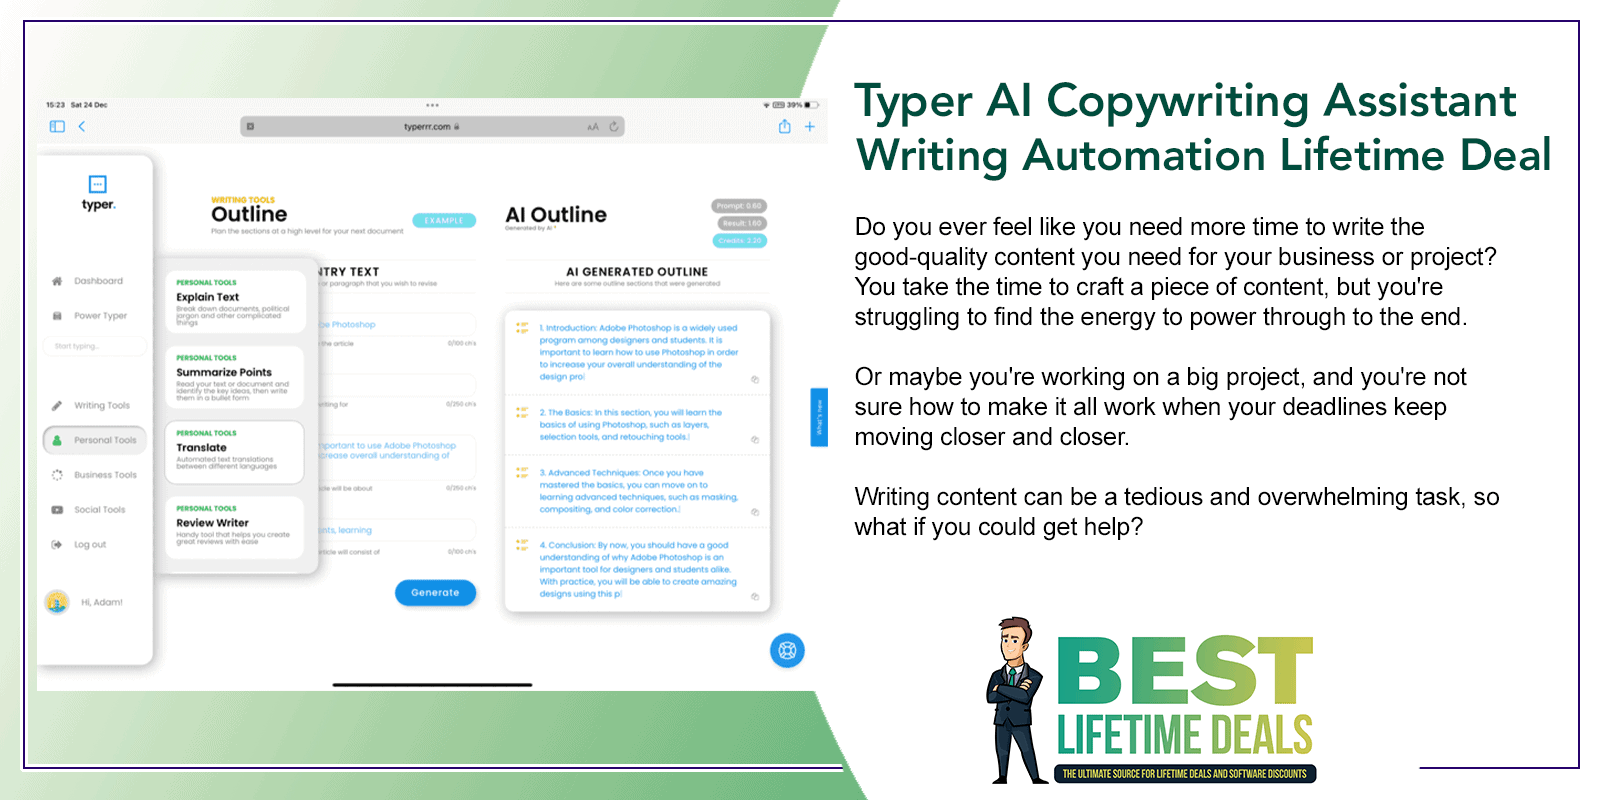 Typer AI Copywriting Assistant Writing Automation Lifetime Deal